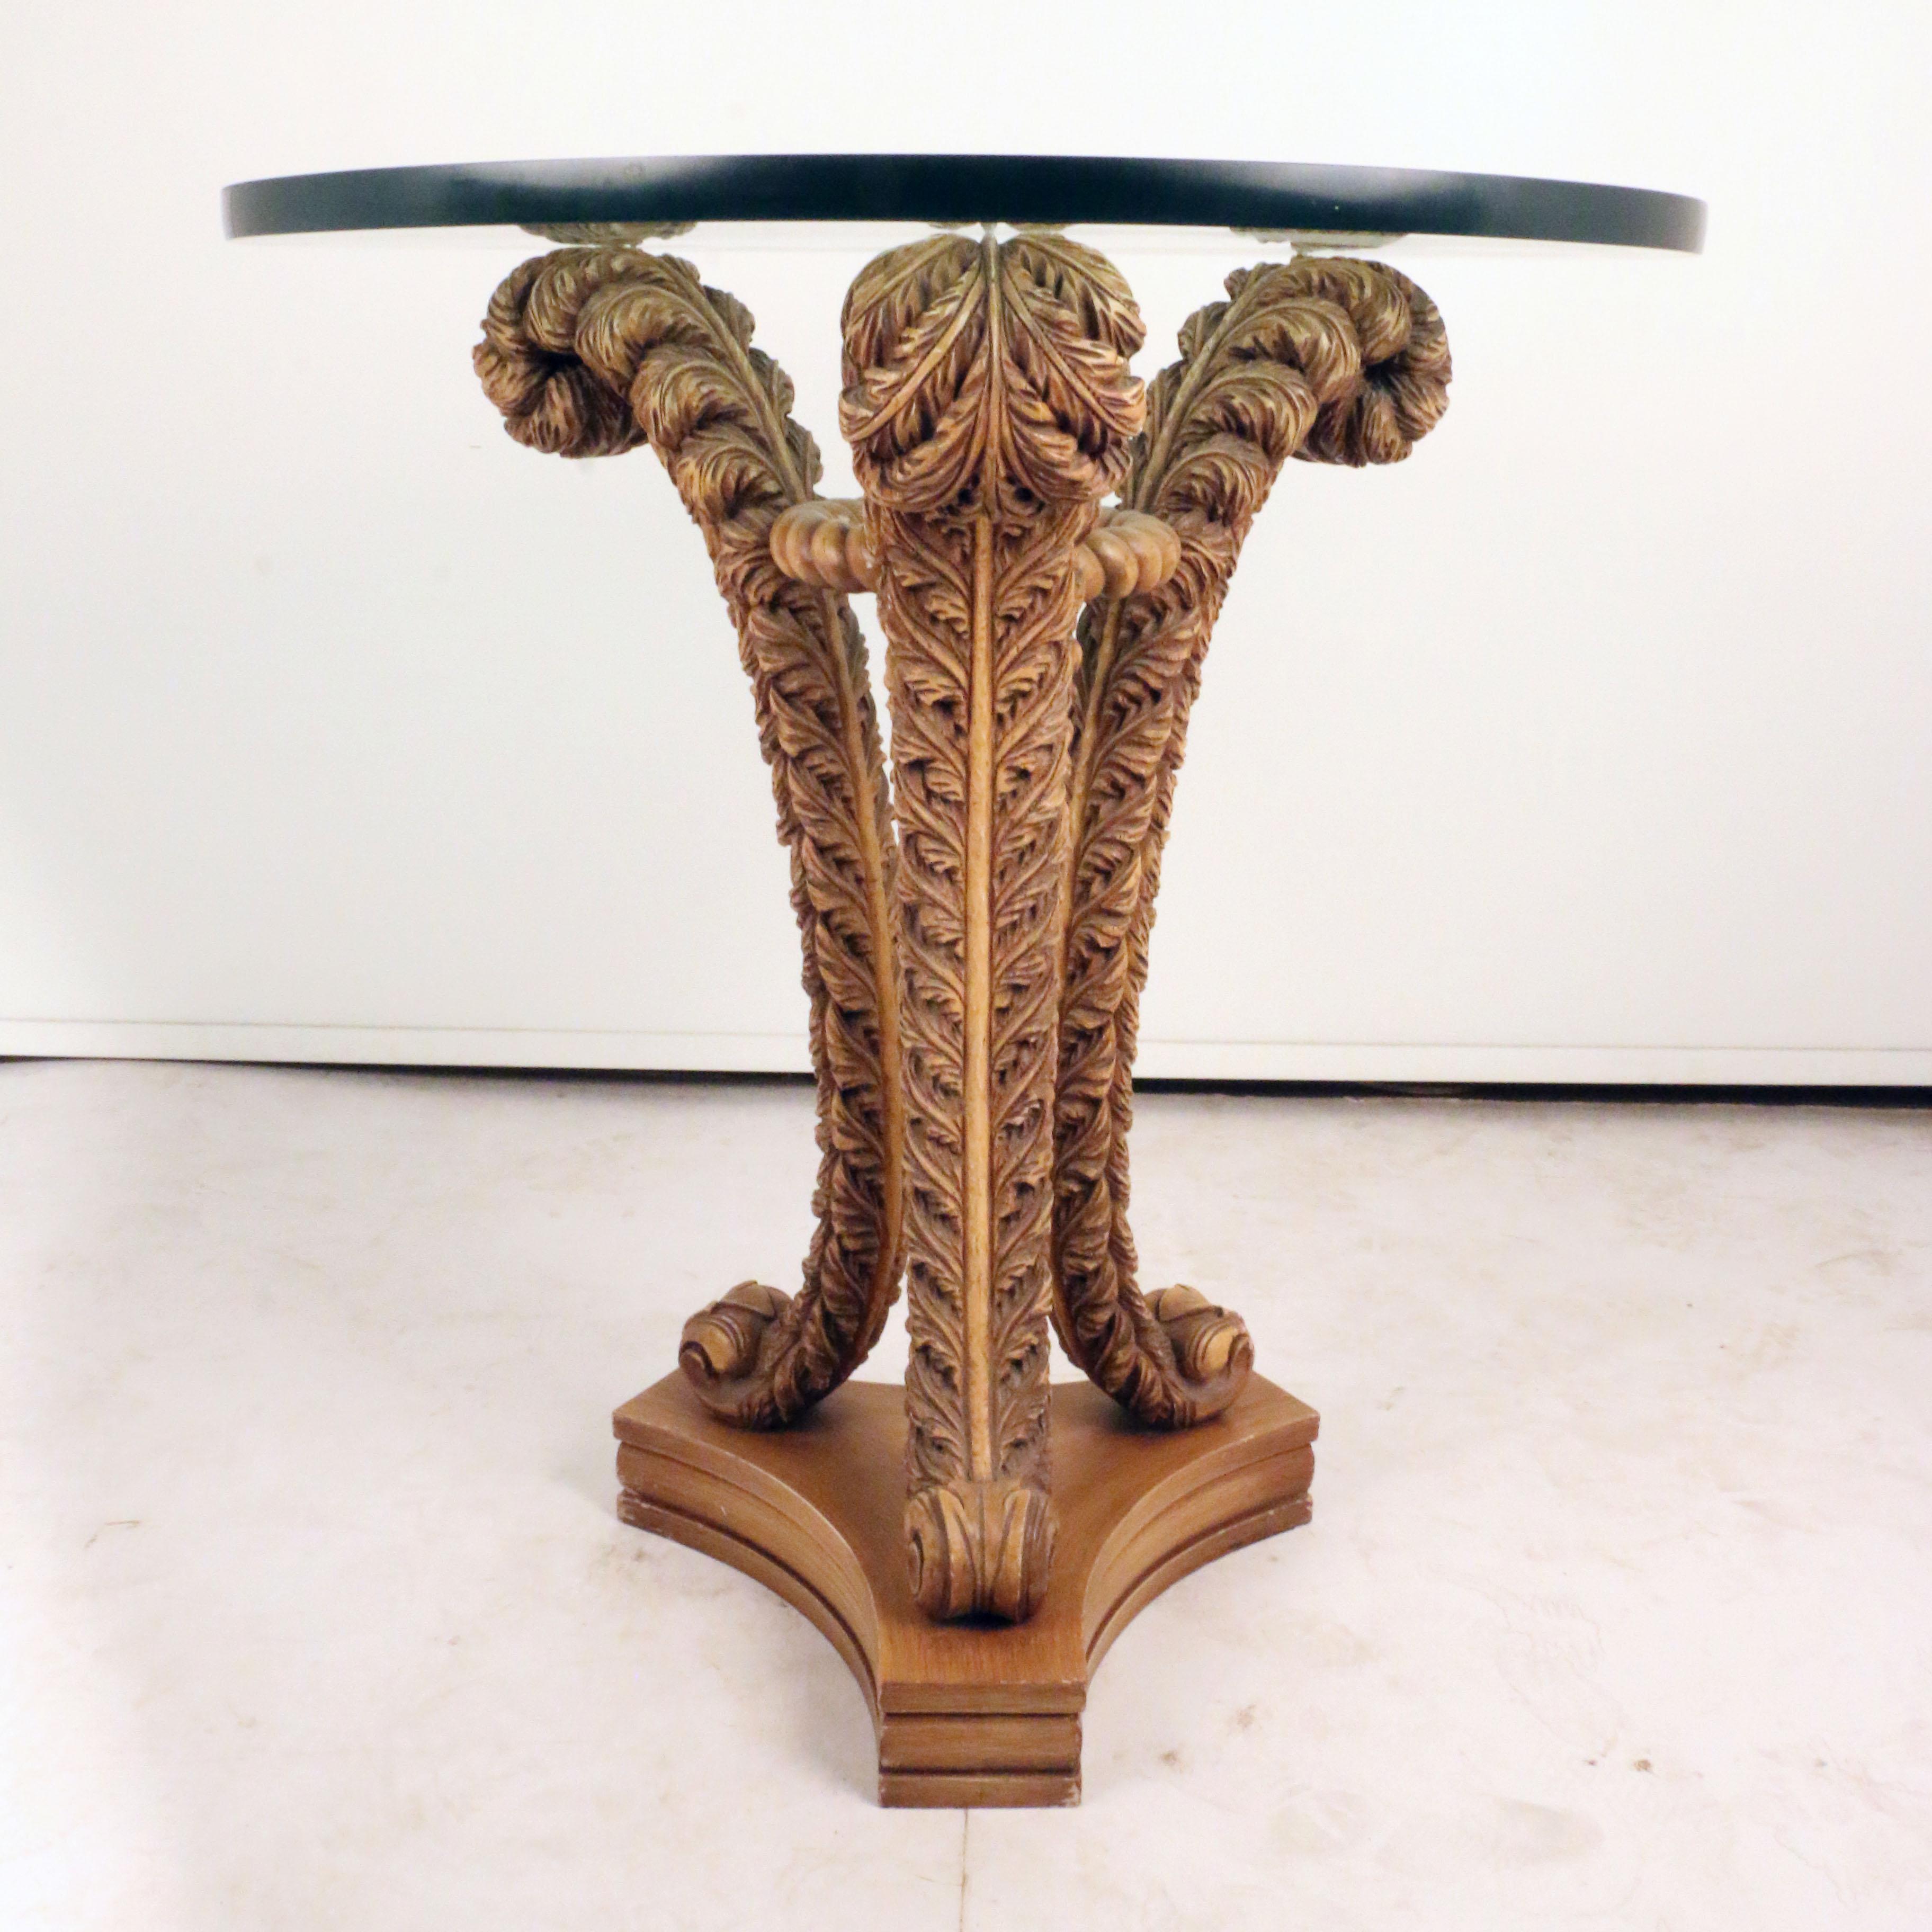 Standing on a trefoil base, and scrolling foot, the plate-glass circular top stands on three curved supports carved as stylised feathers, braced at the top by an annular band. This is a highly unusual form but has much in common with other Pistono